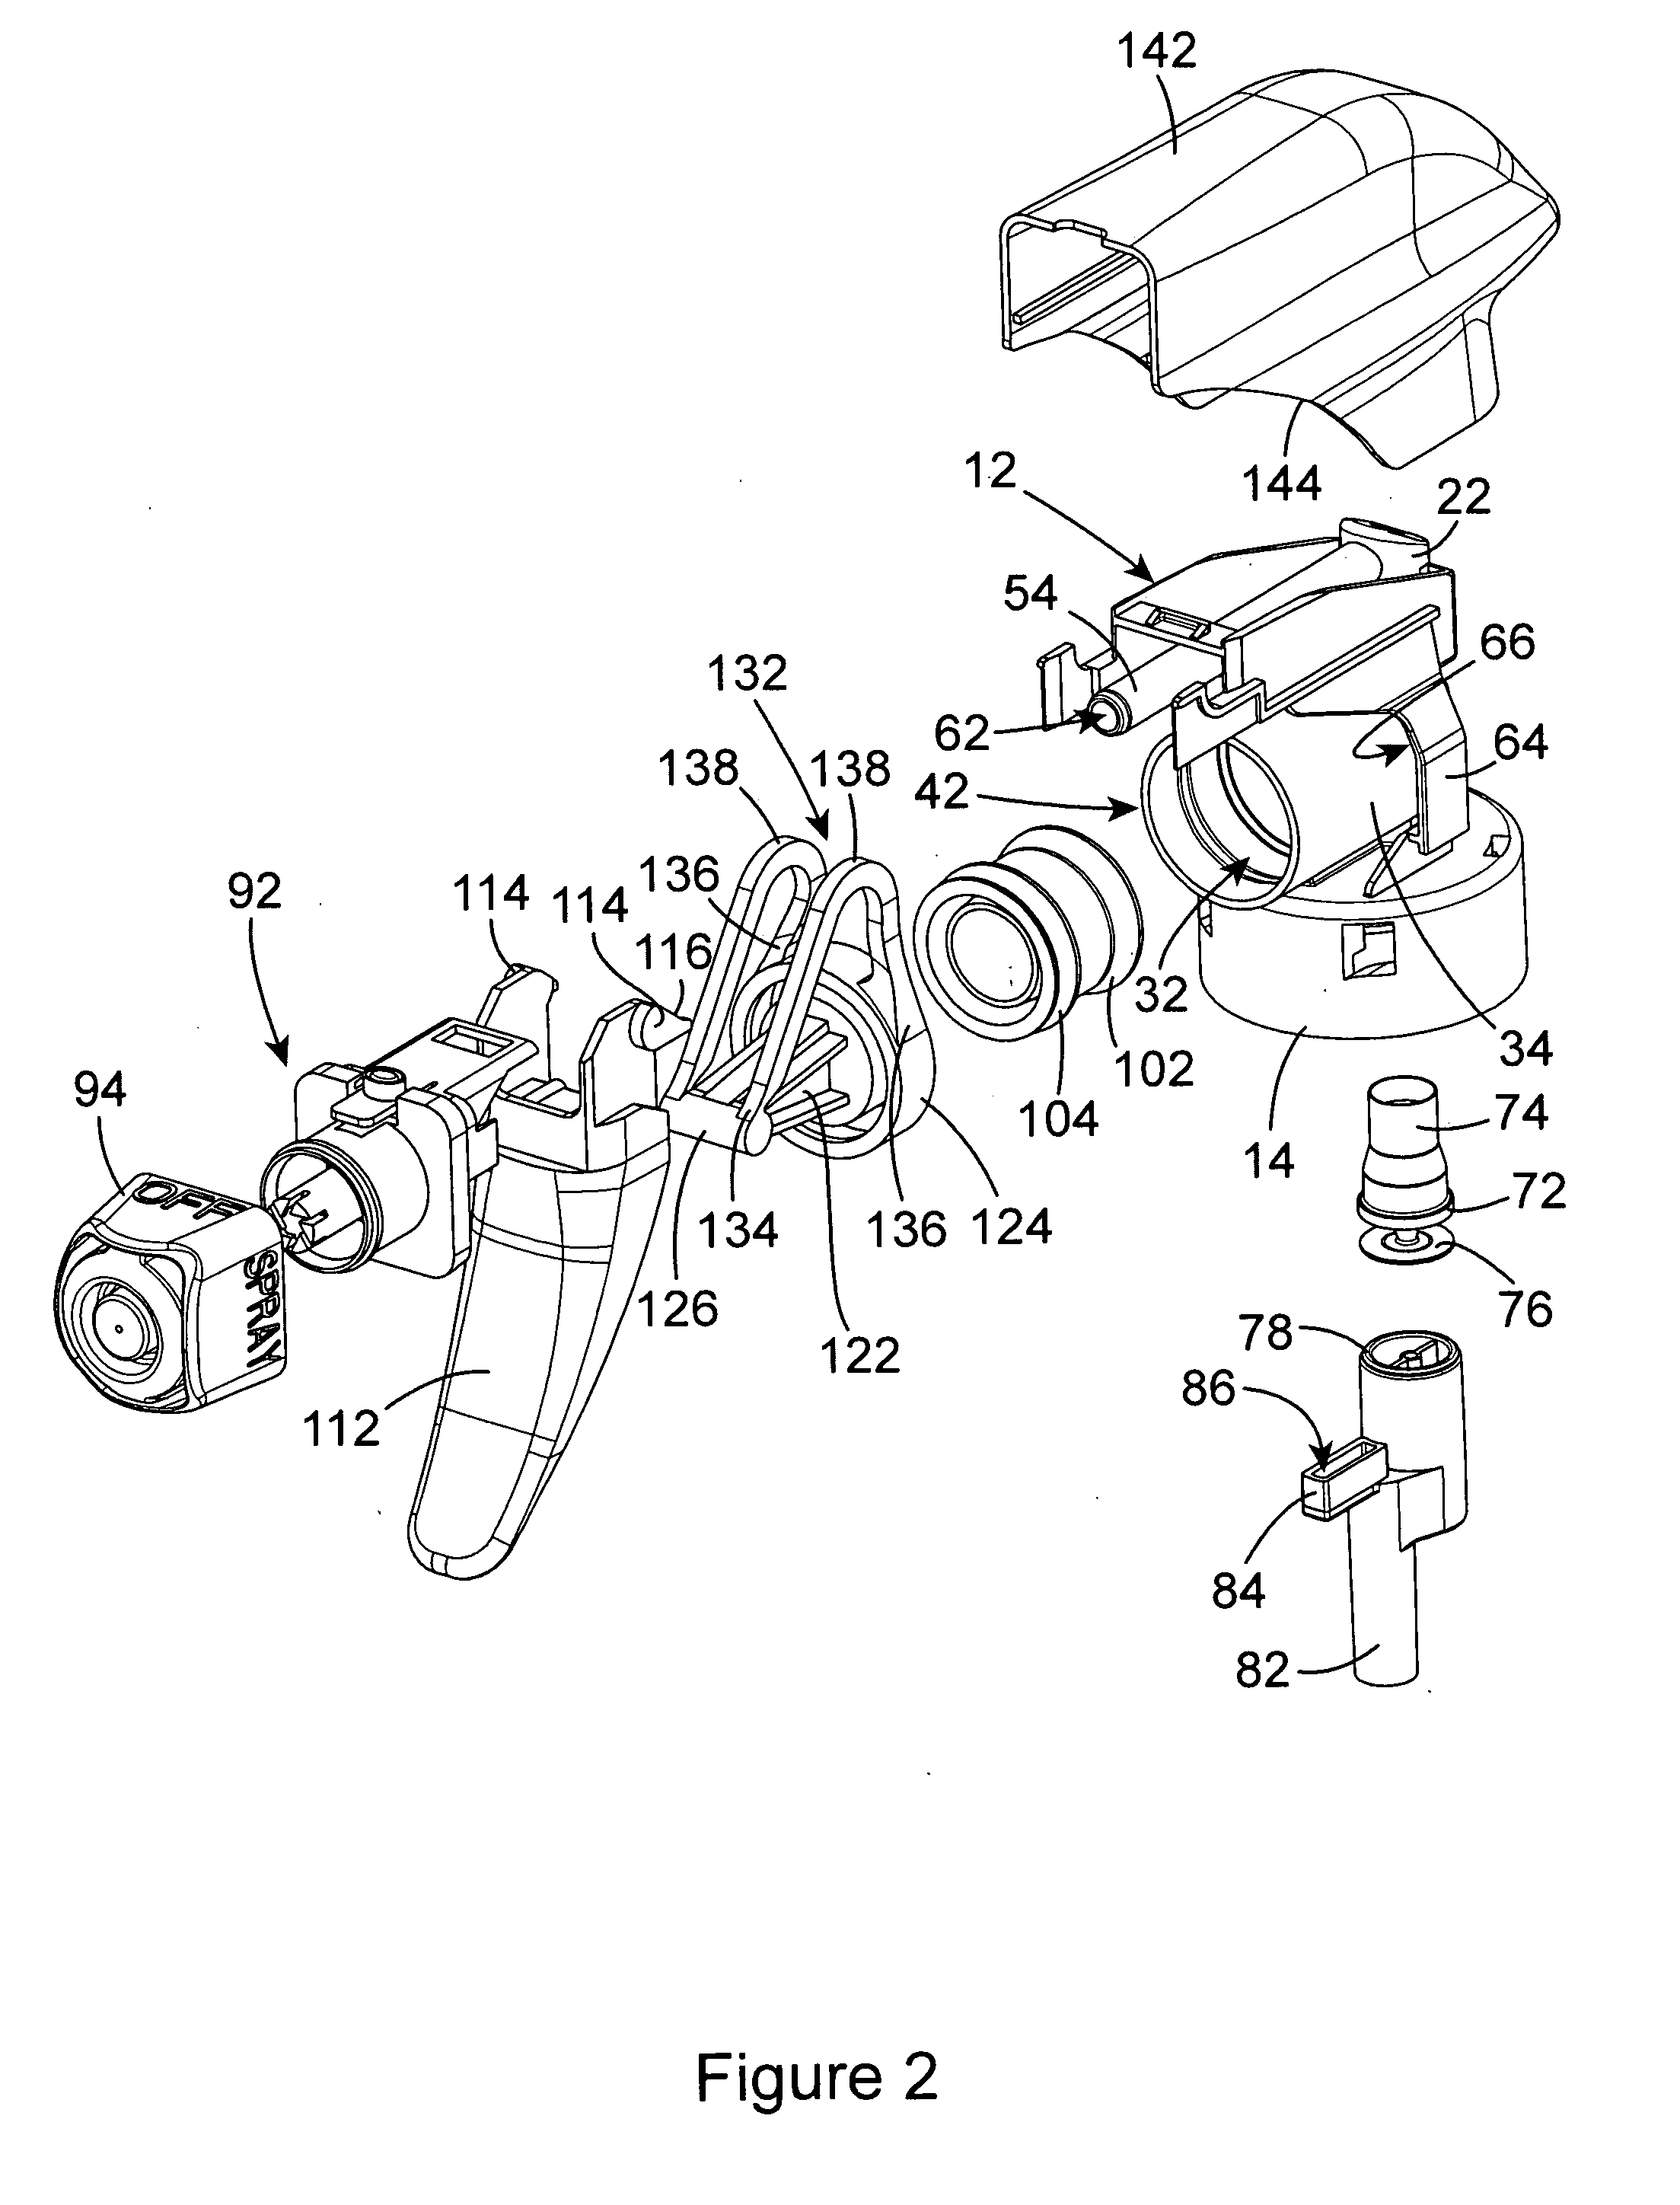 Trigger sprayer with integral piston rod and u-shaped spring